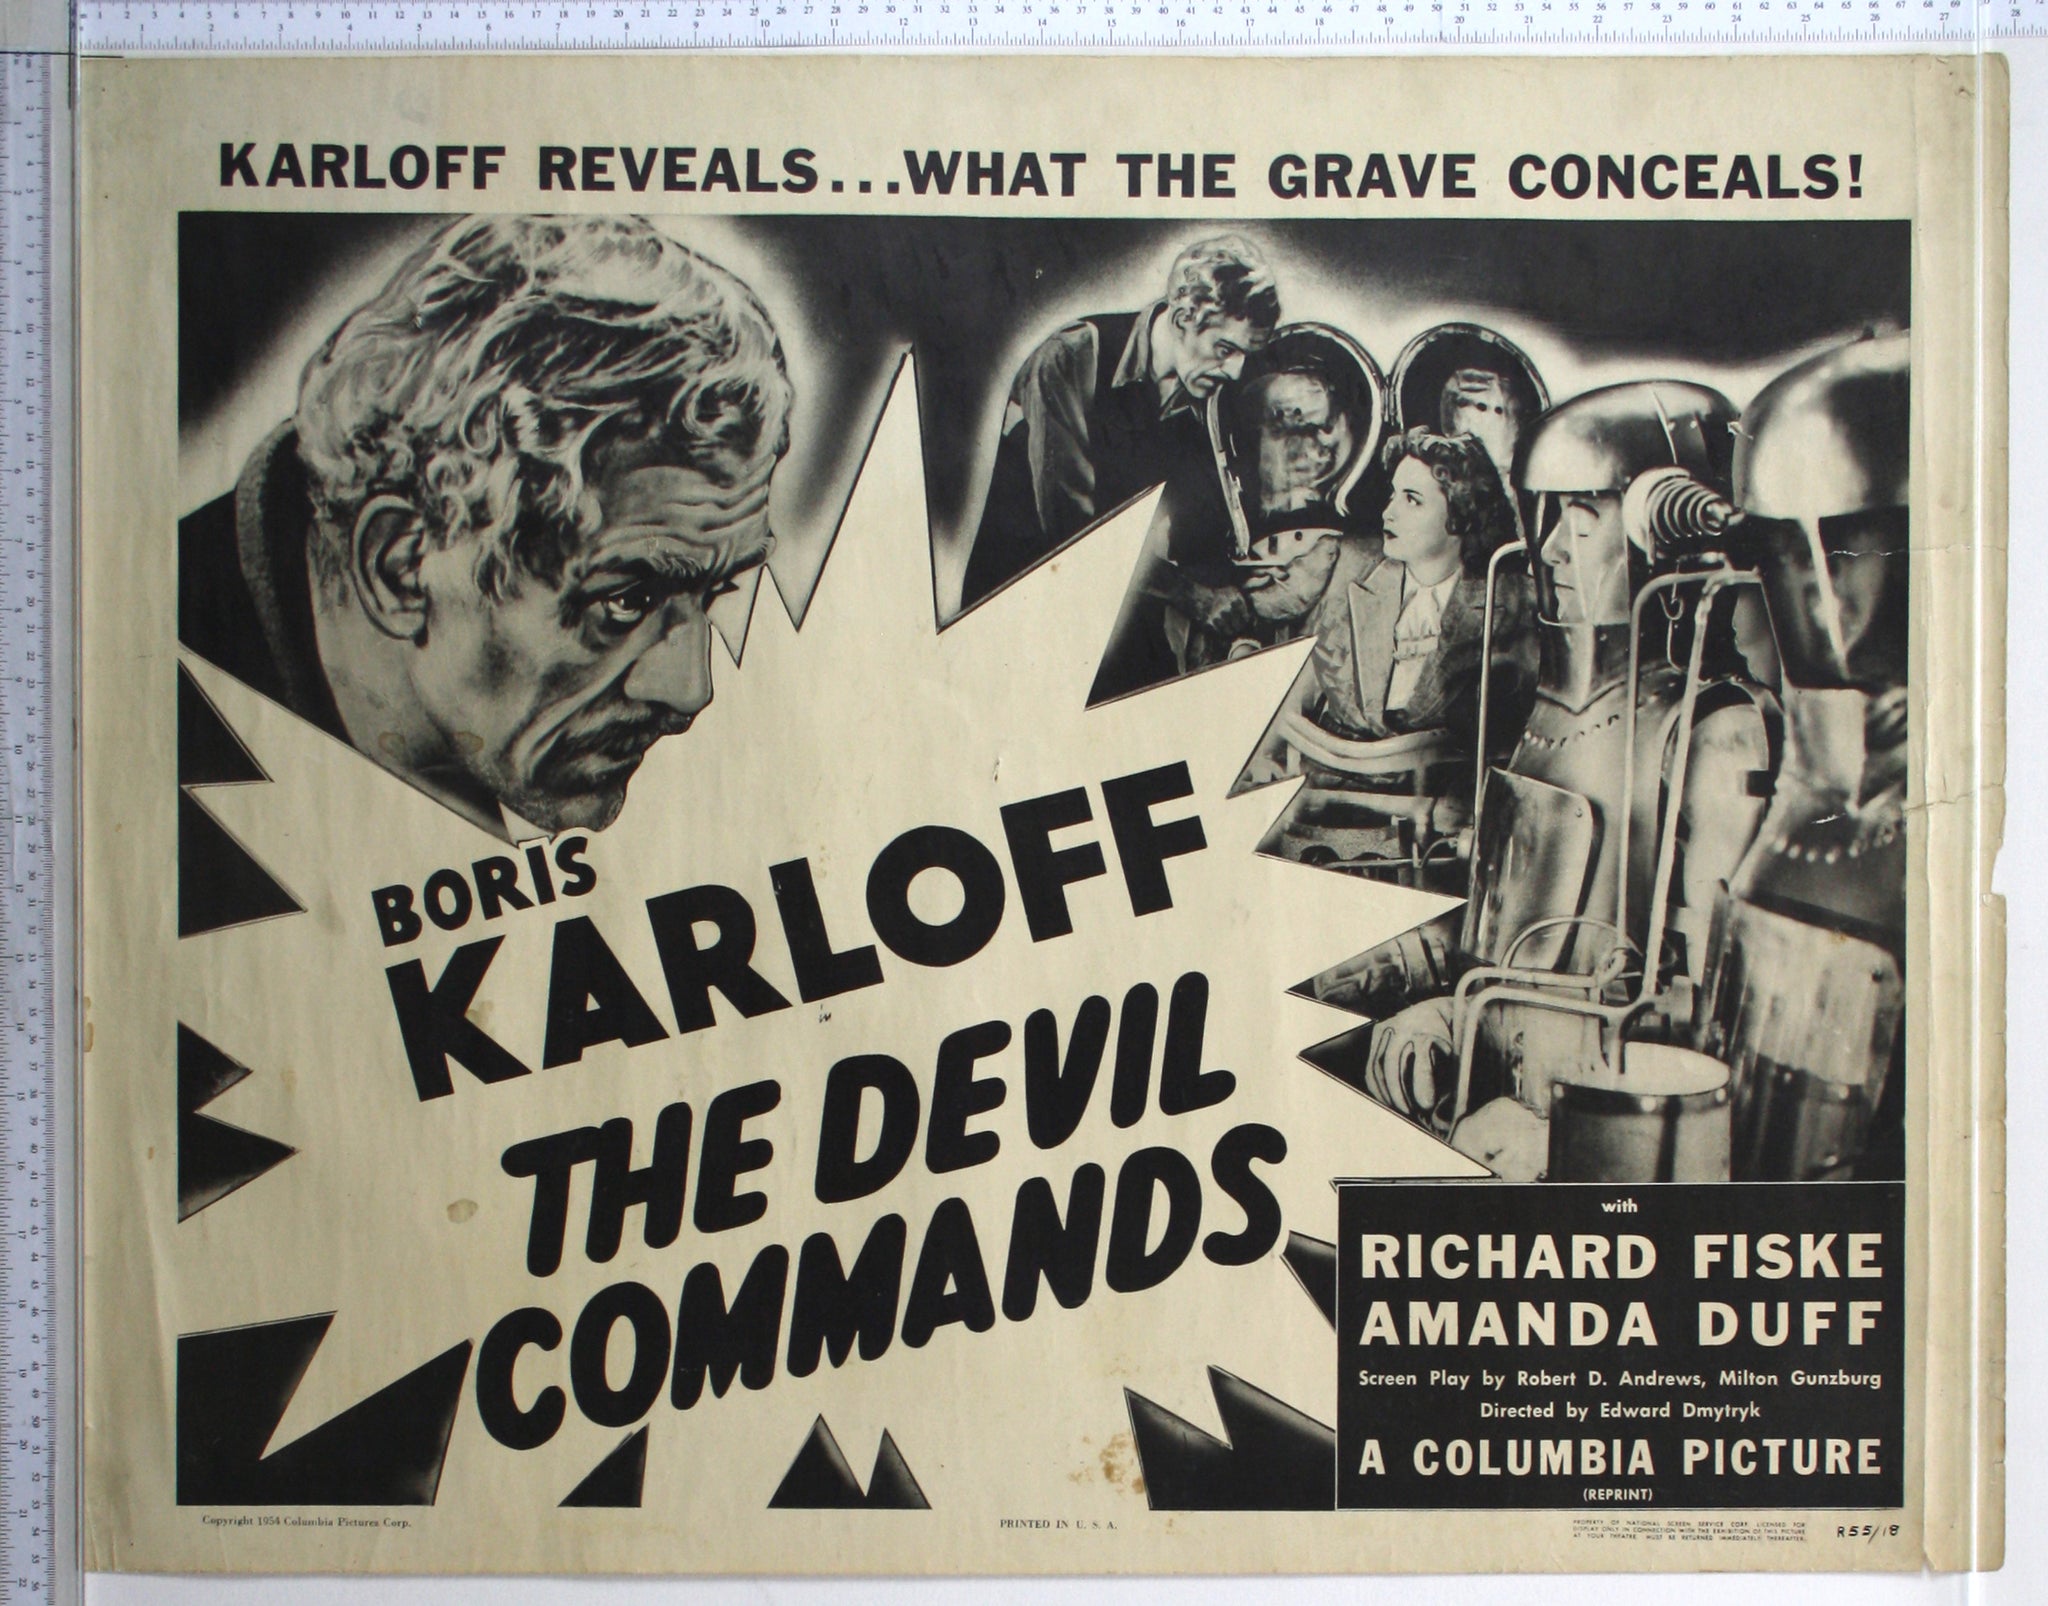 B+W Karloff close up, and about to place girl in special suit to communicate with the dead. Title in star shape at bottom.